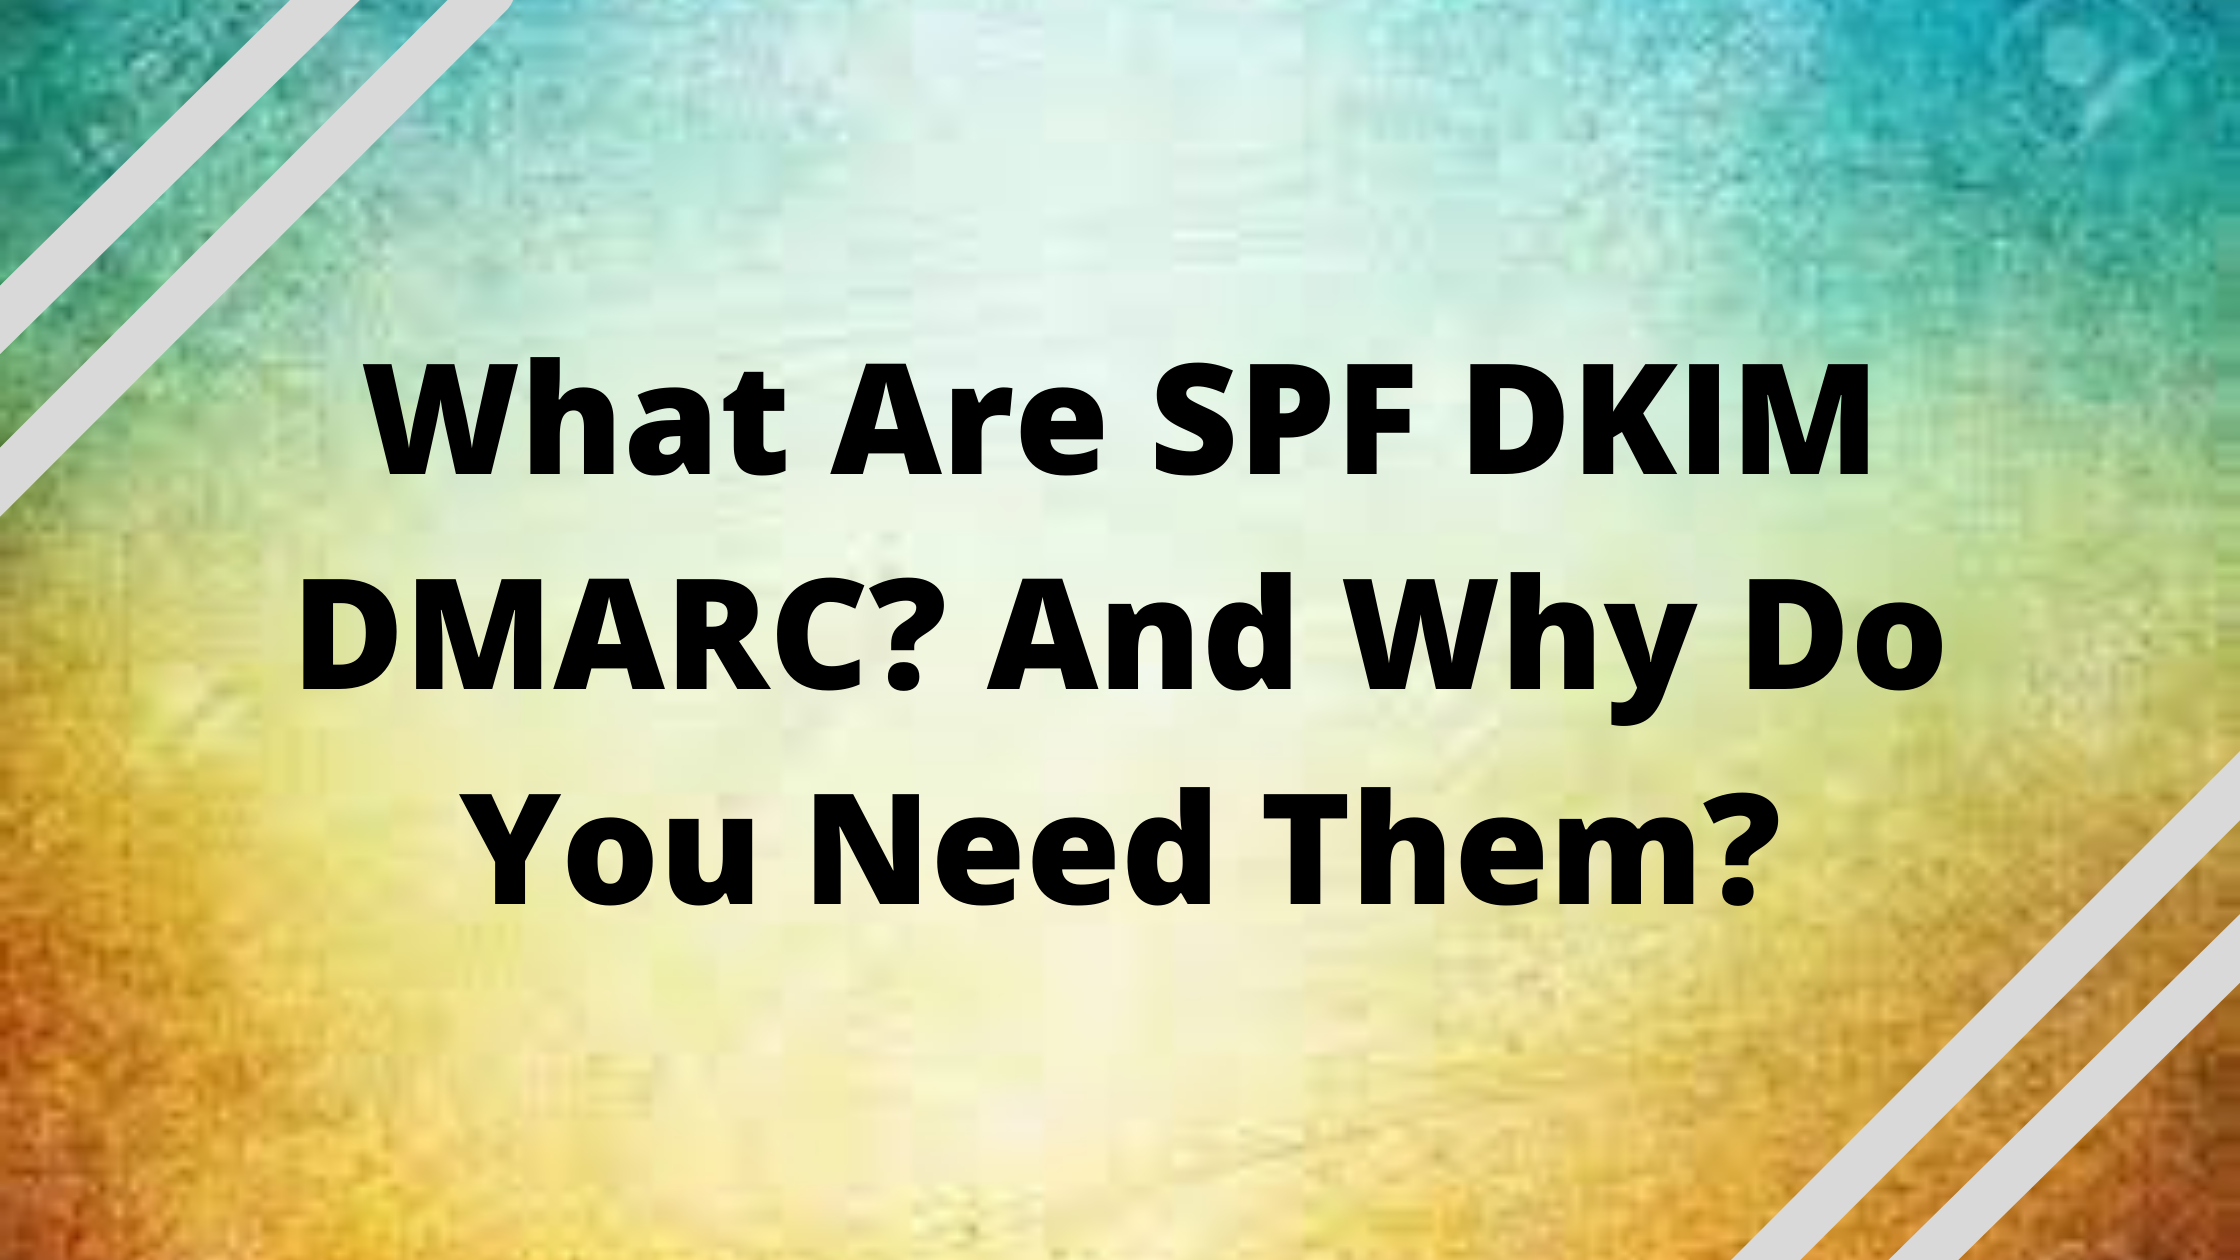 SPF DKIM and DMARC Records